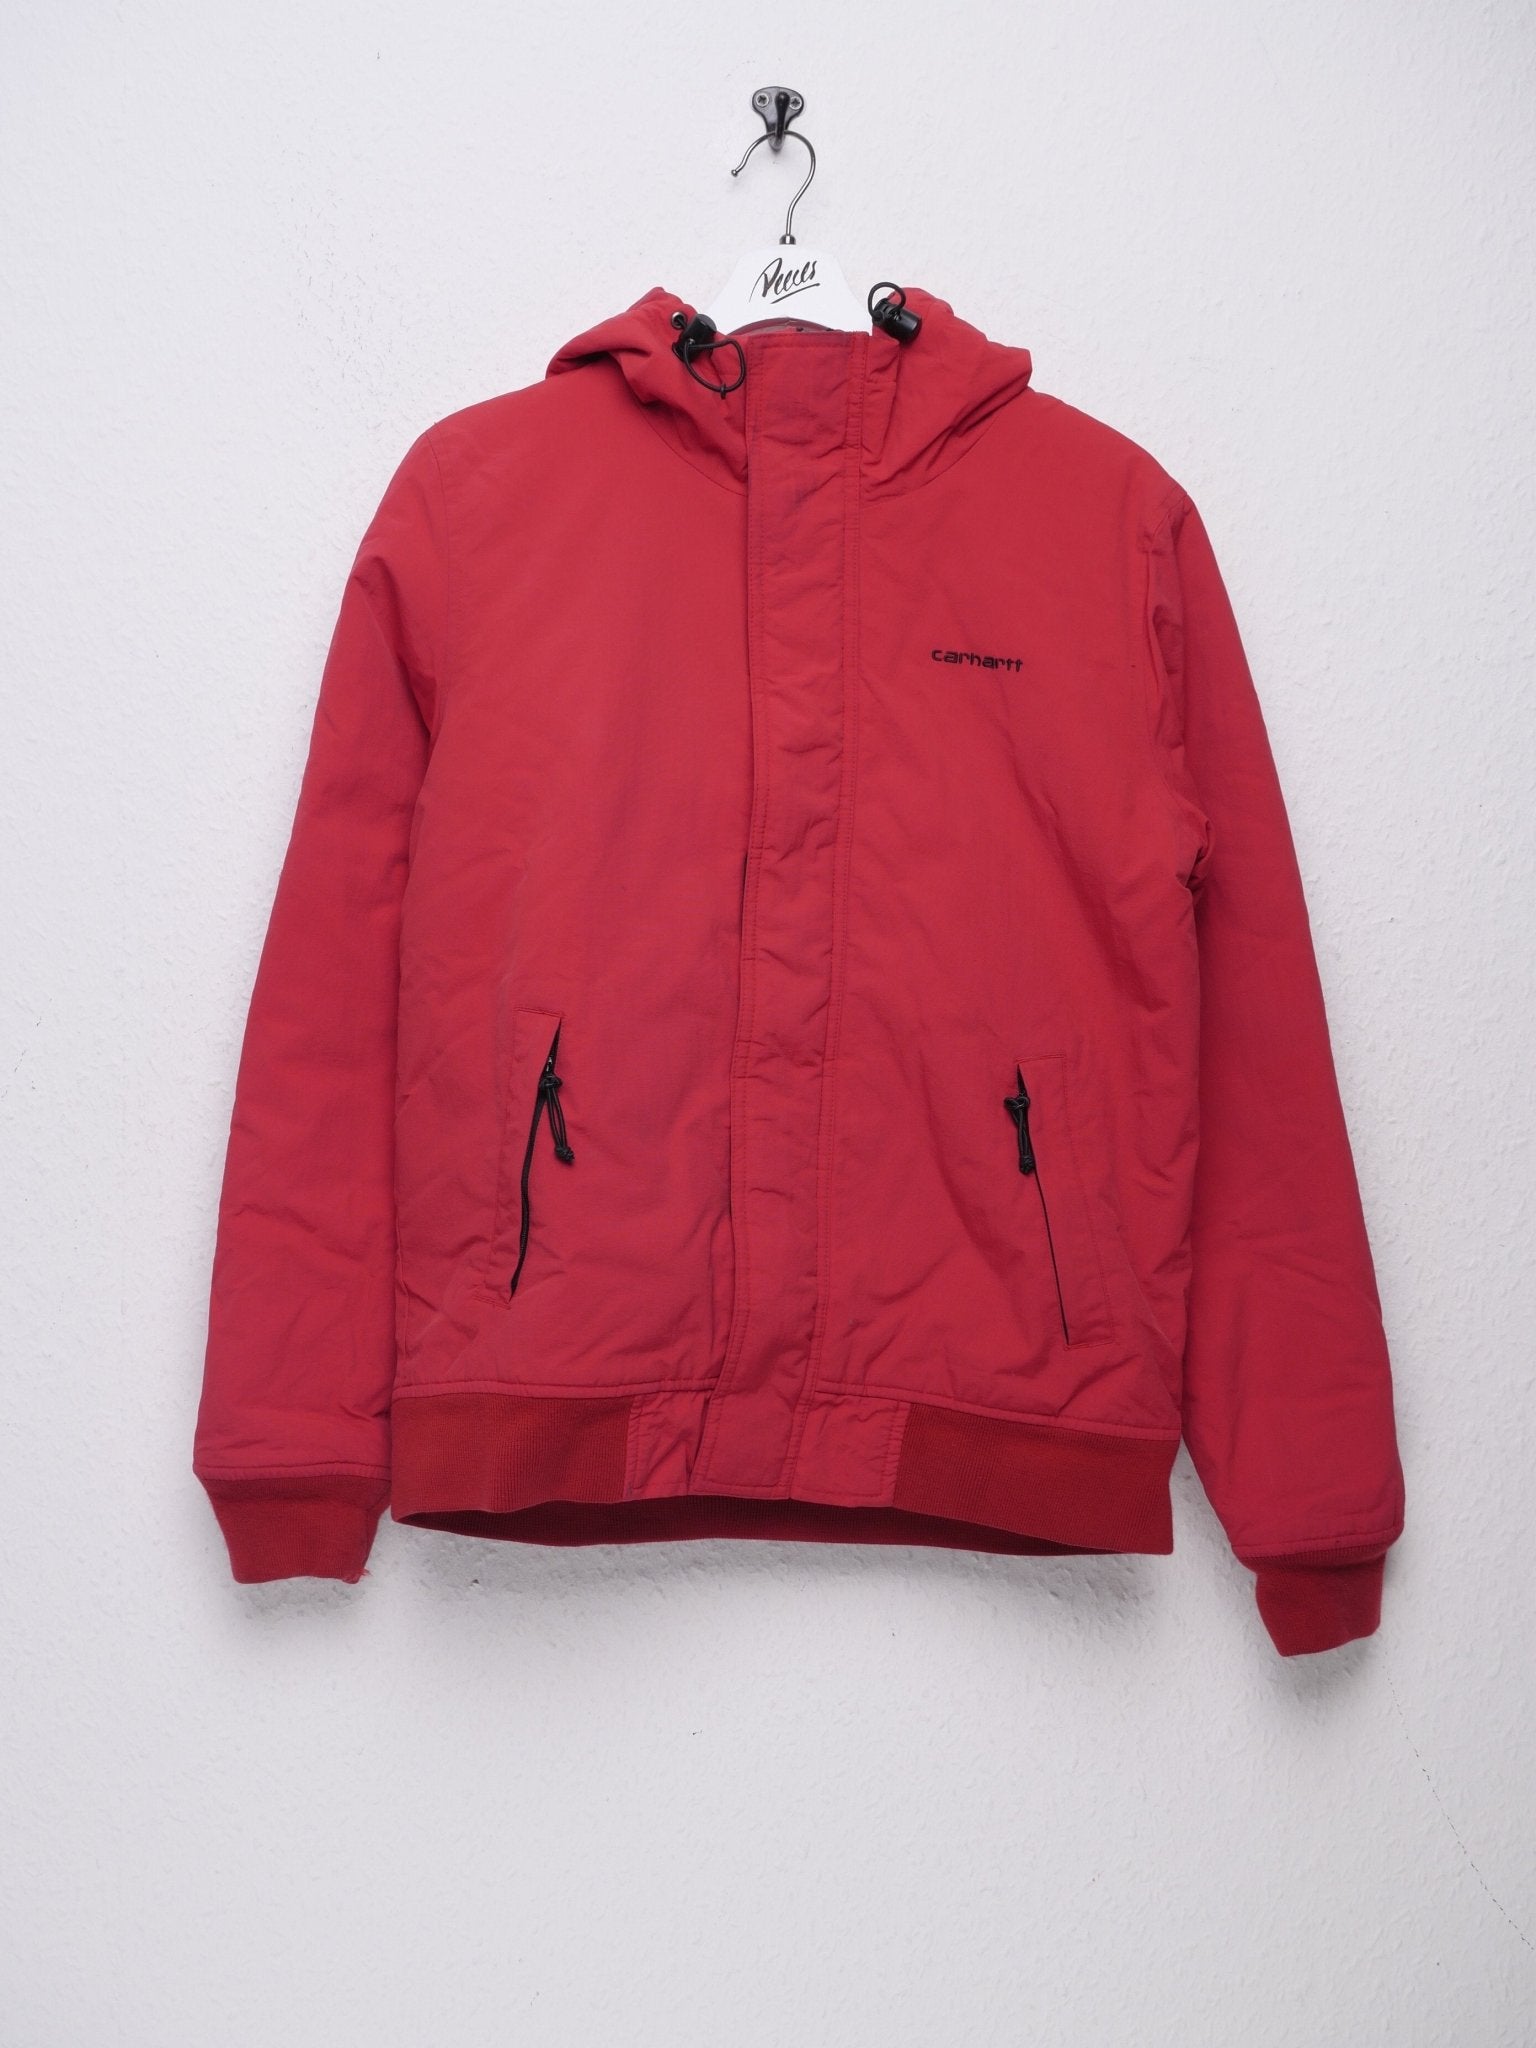 Carhartt embroidered Spellout red heavy Jacket - Peeces